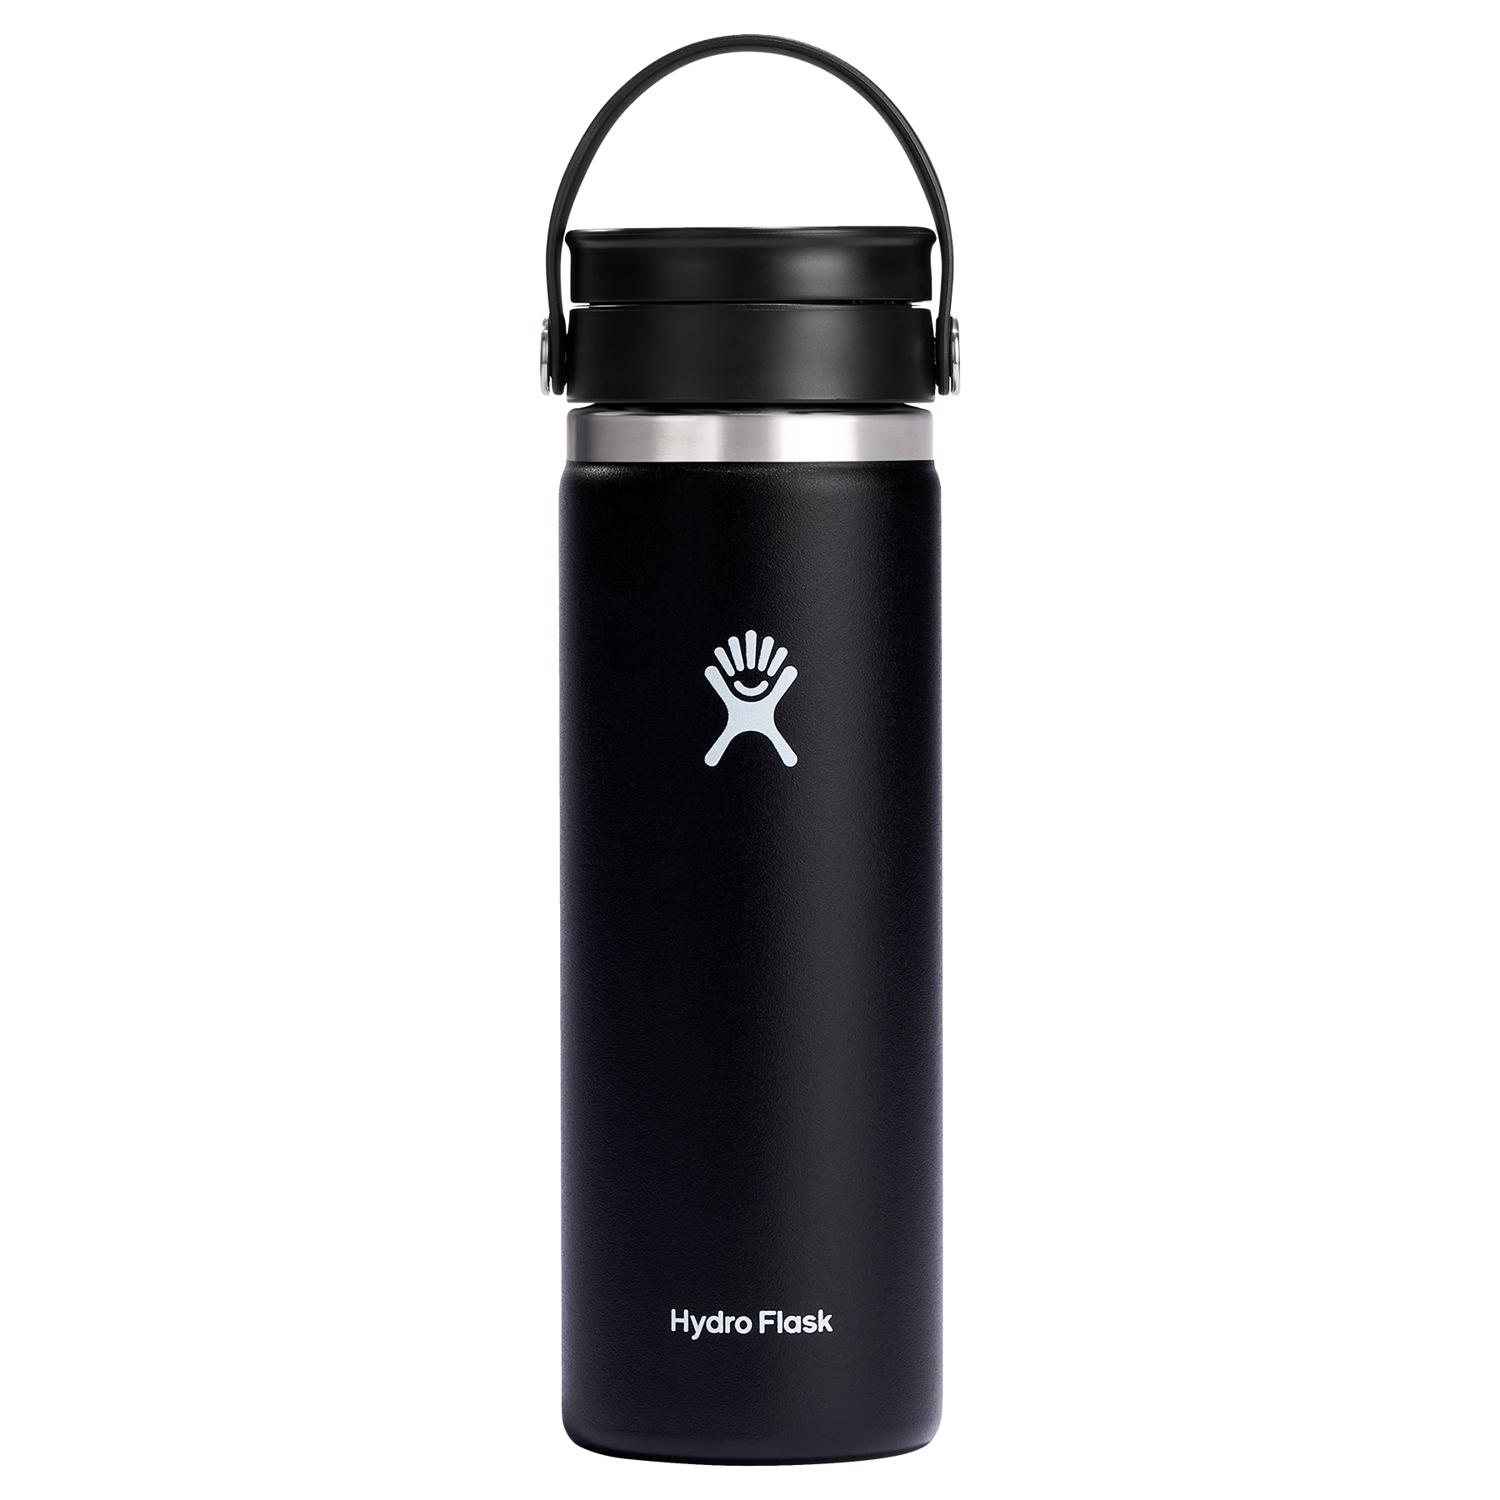 Photos - Other Accessories Hydro Flask 20 oz Black BPA Free Insulated Bottle W20BCX001 